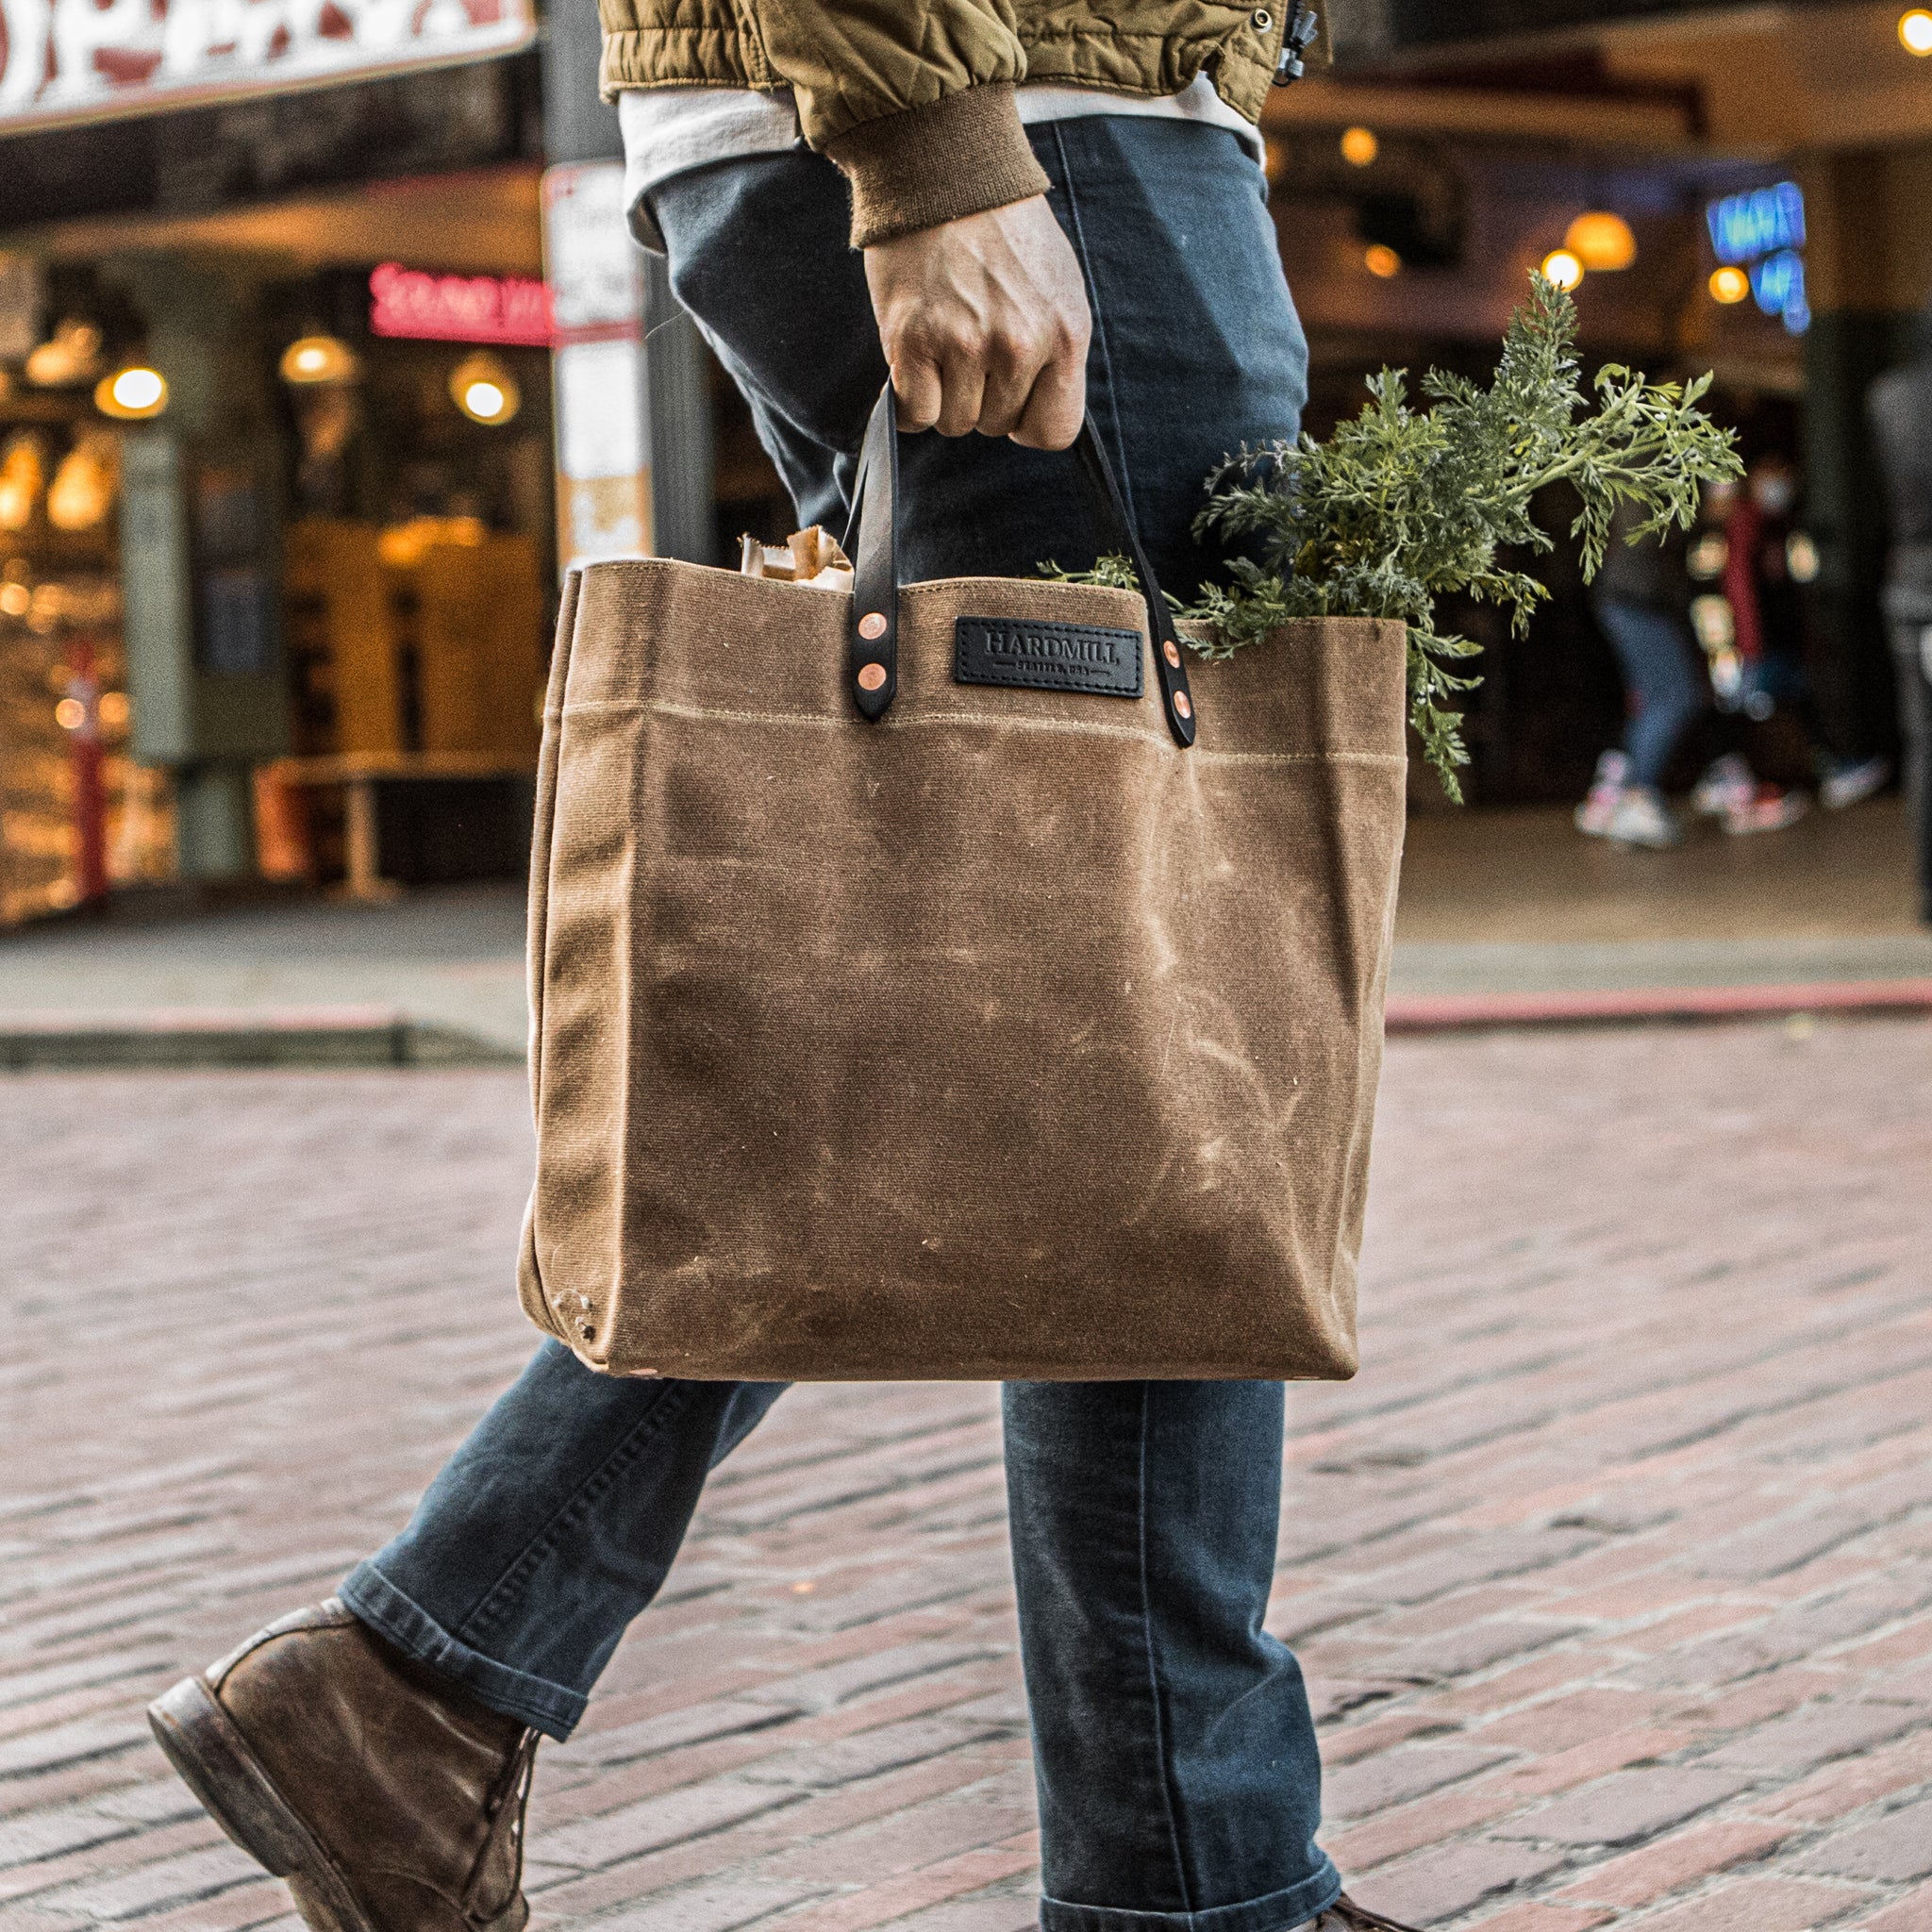 BOGO FREE on Hardmill waxed canvas and leather totes